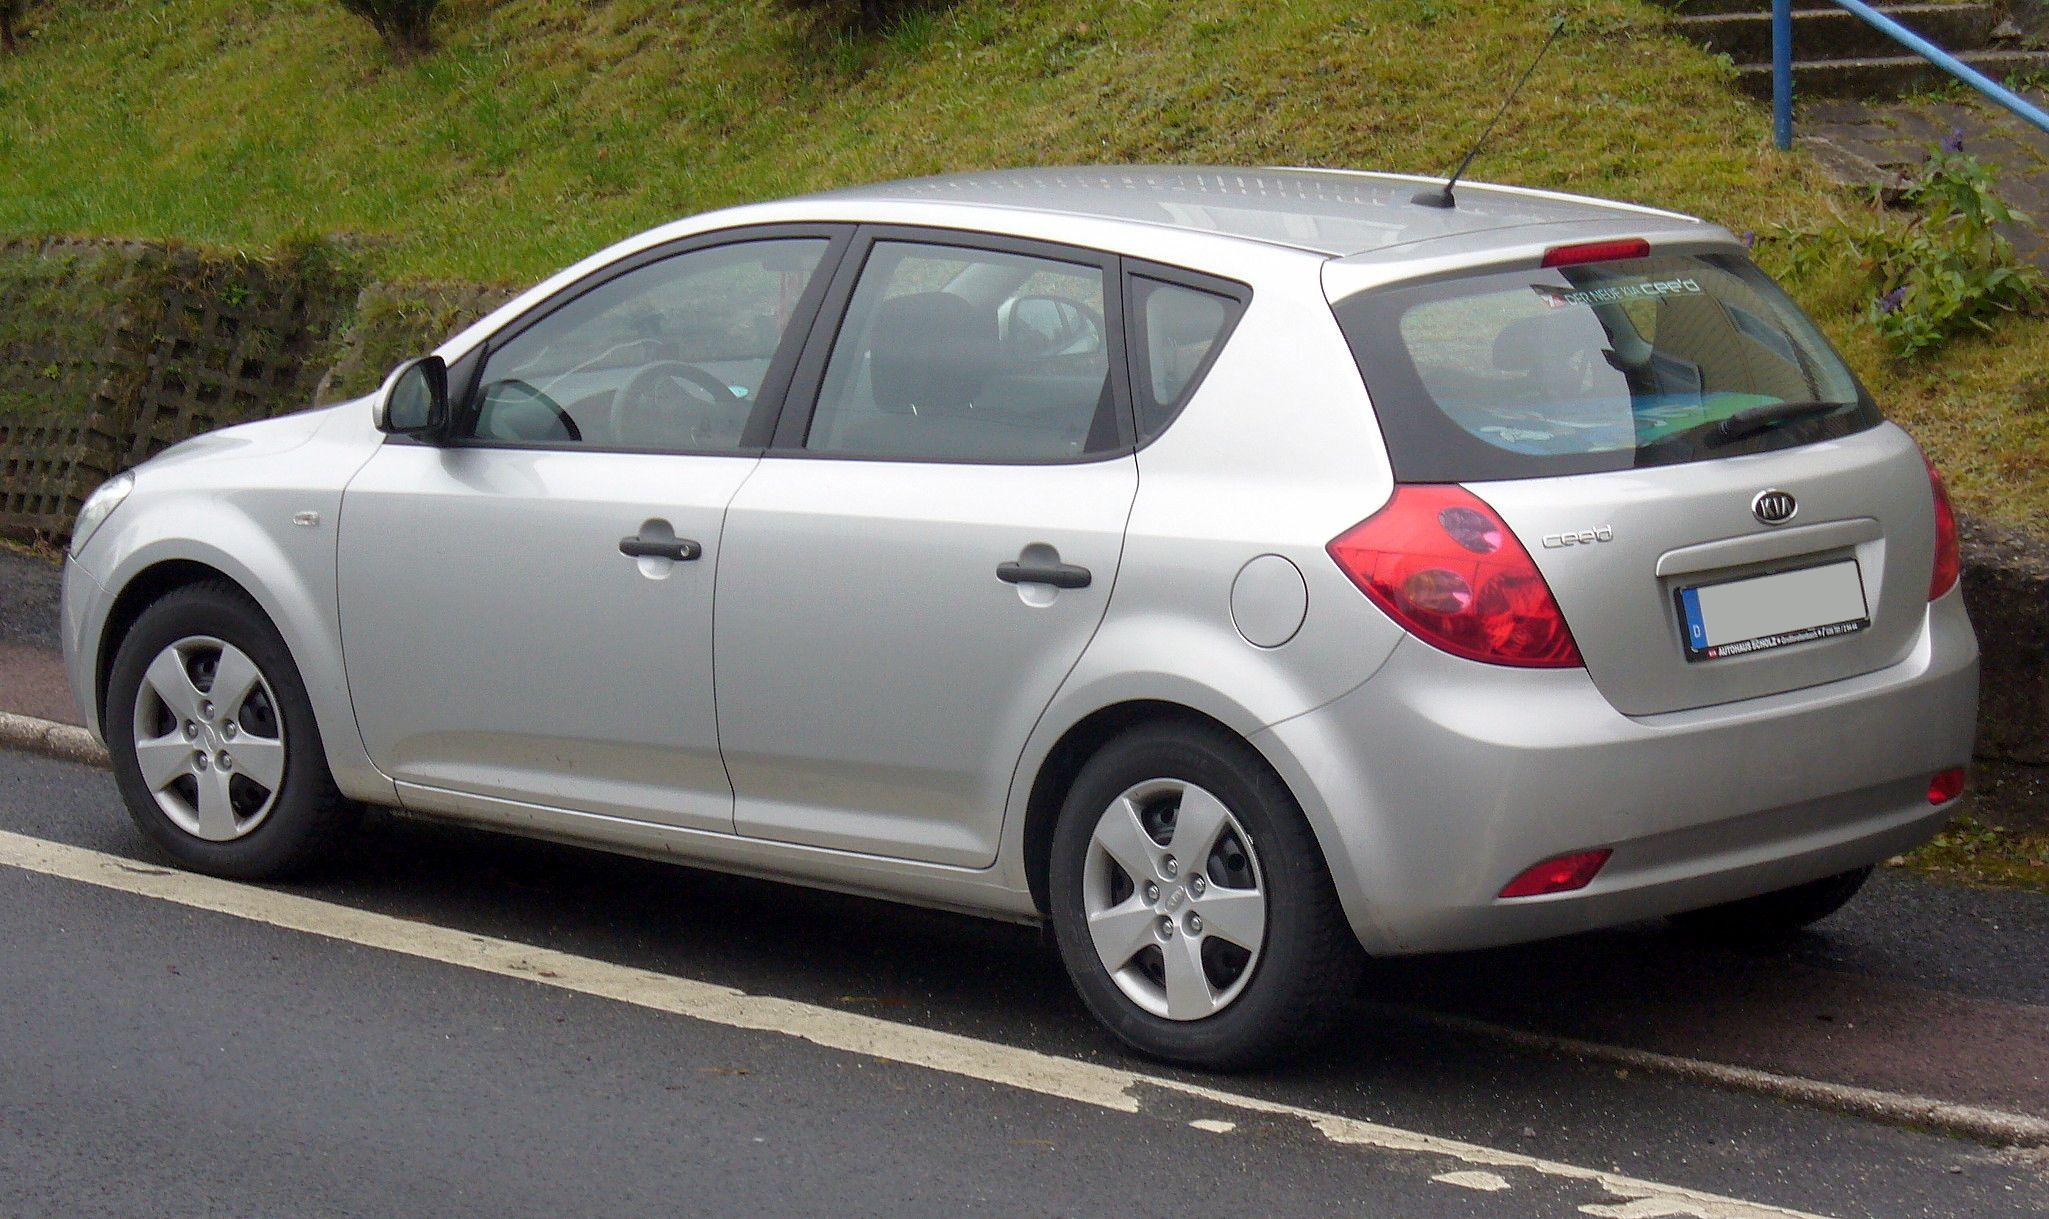 Kia Ceed 2007 Review, Amazing Pictures and Images Look